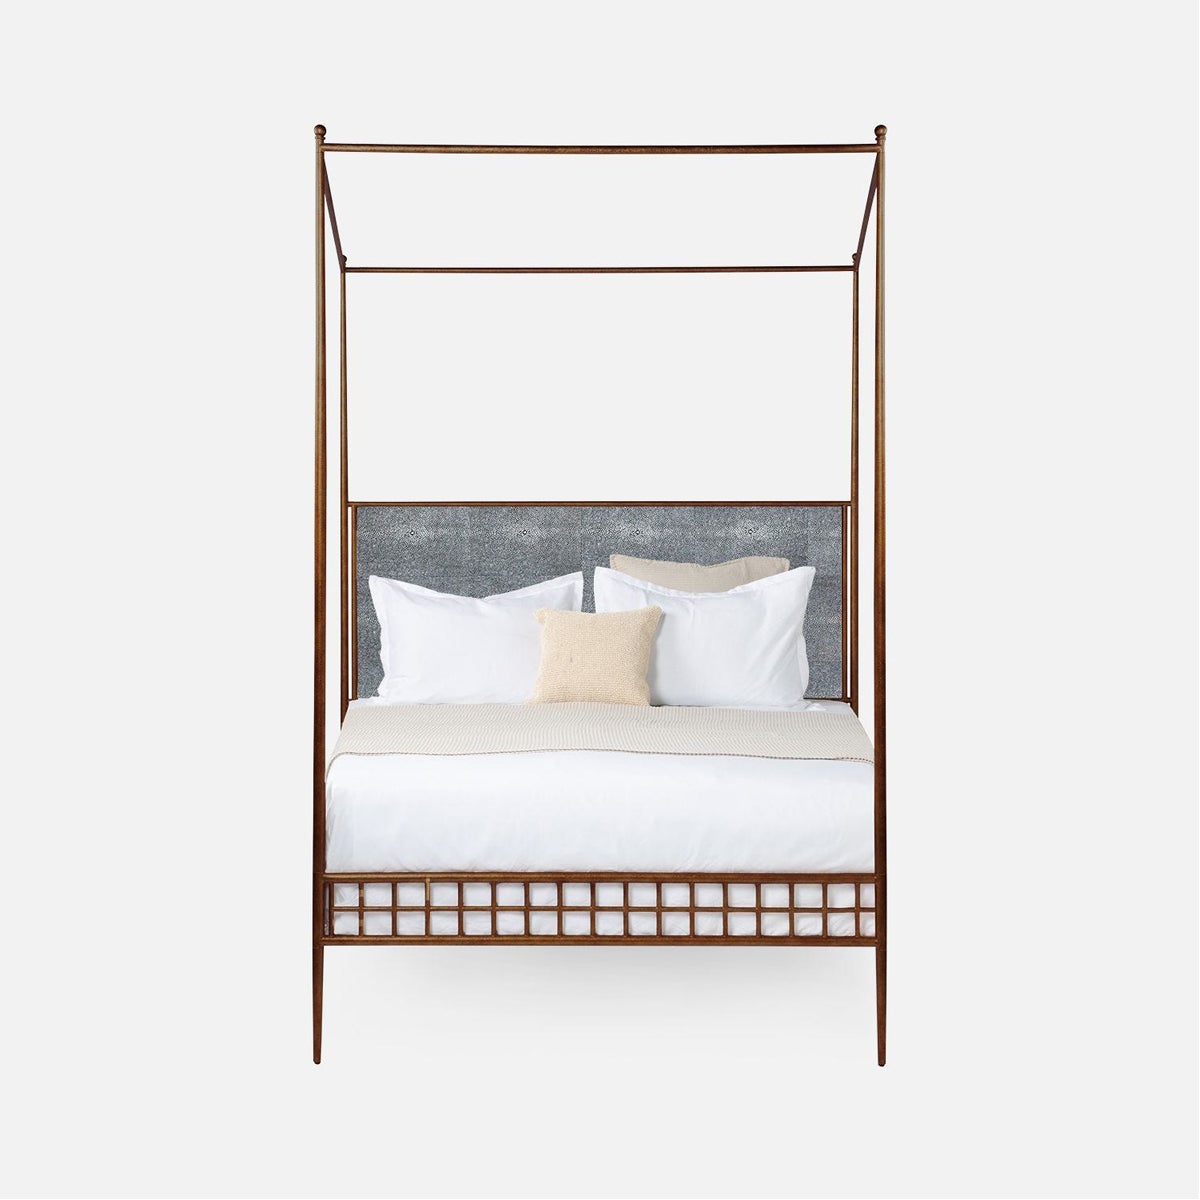 Made Goods Hamilton Textured Iron Canopy Bed in Humboldt Cotton Jute